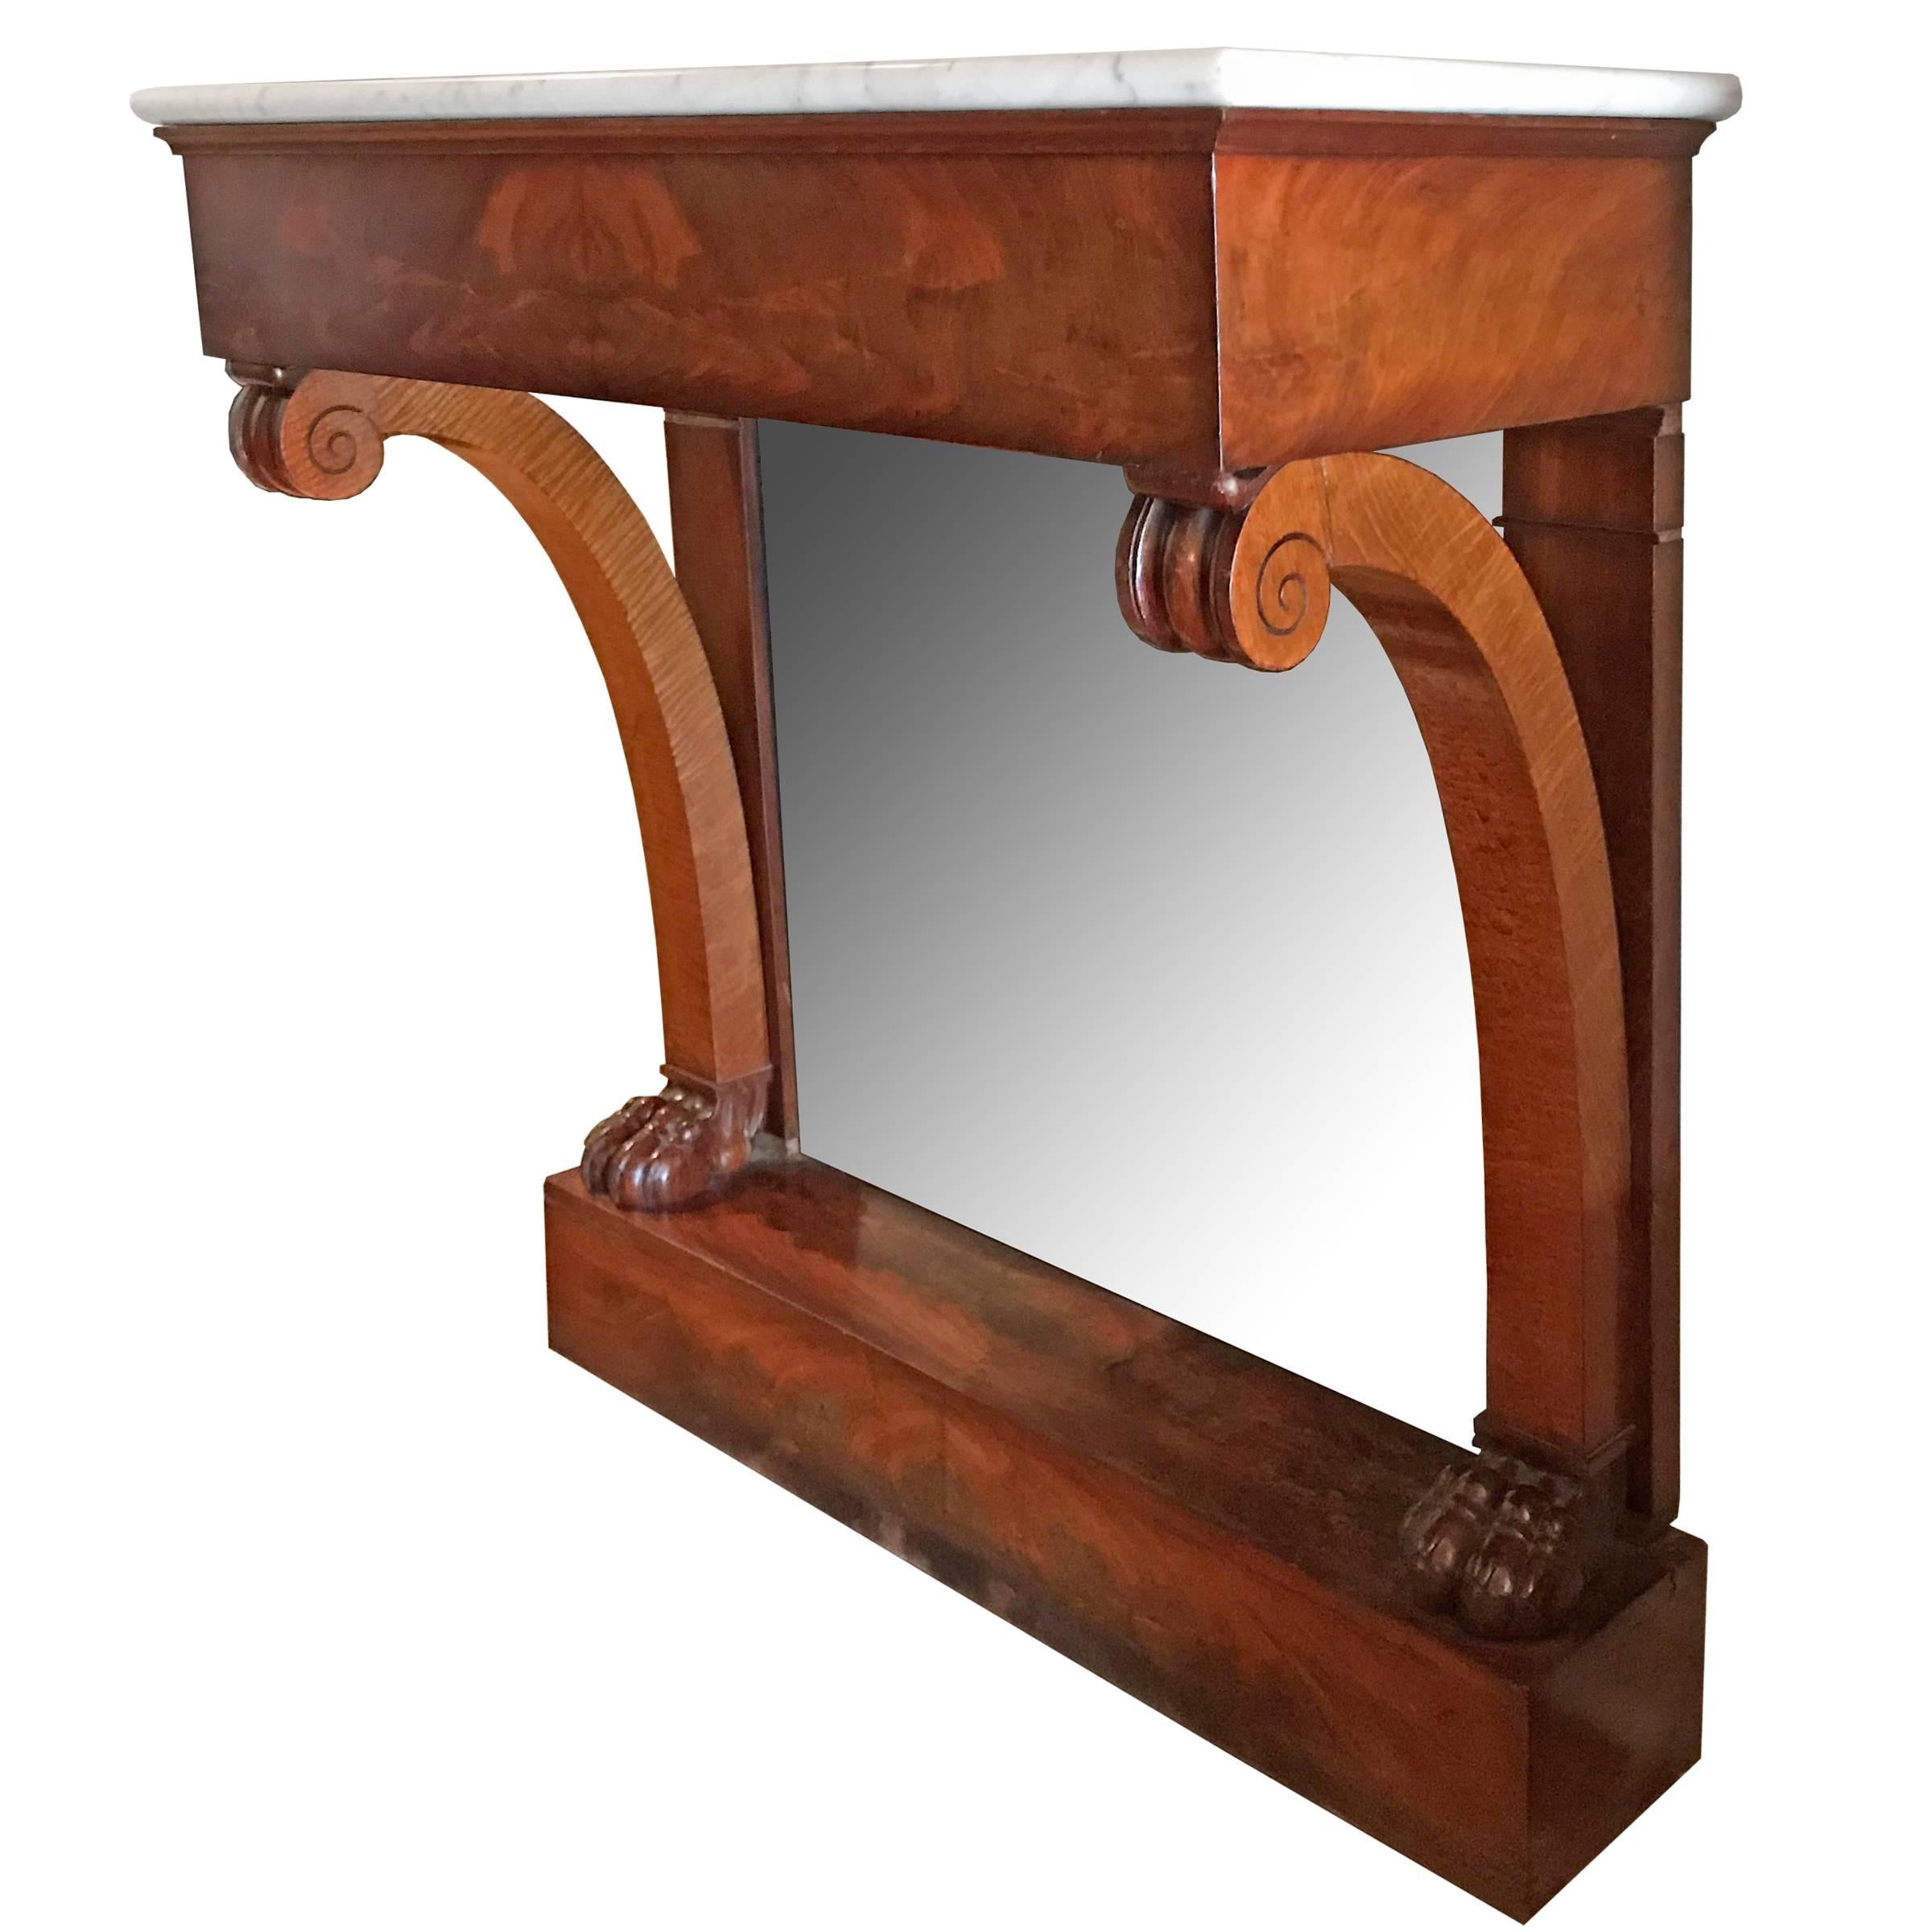 A late 19th century French bookmatched flame mahogany pier console table with white marble top, lion paw feet, and a mirror. Table mounts to the wall.